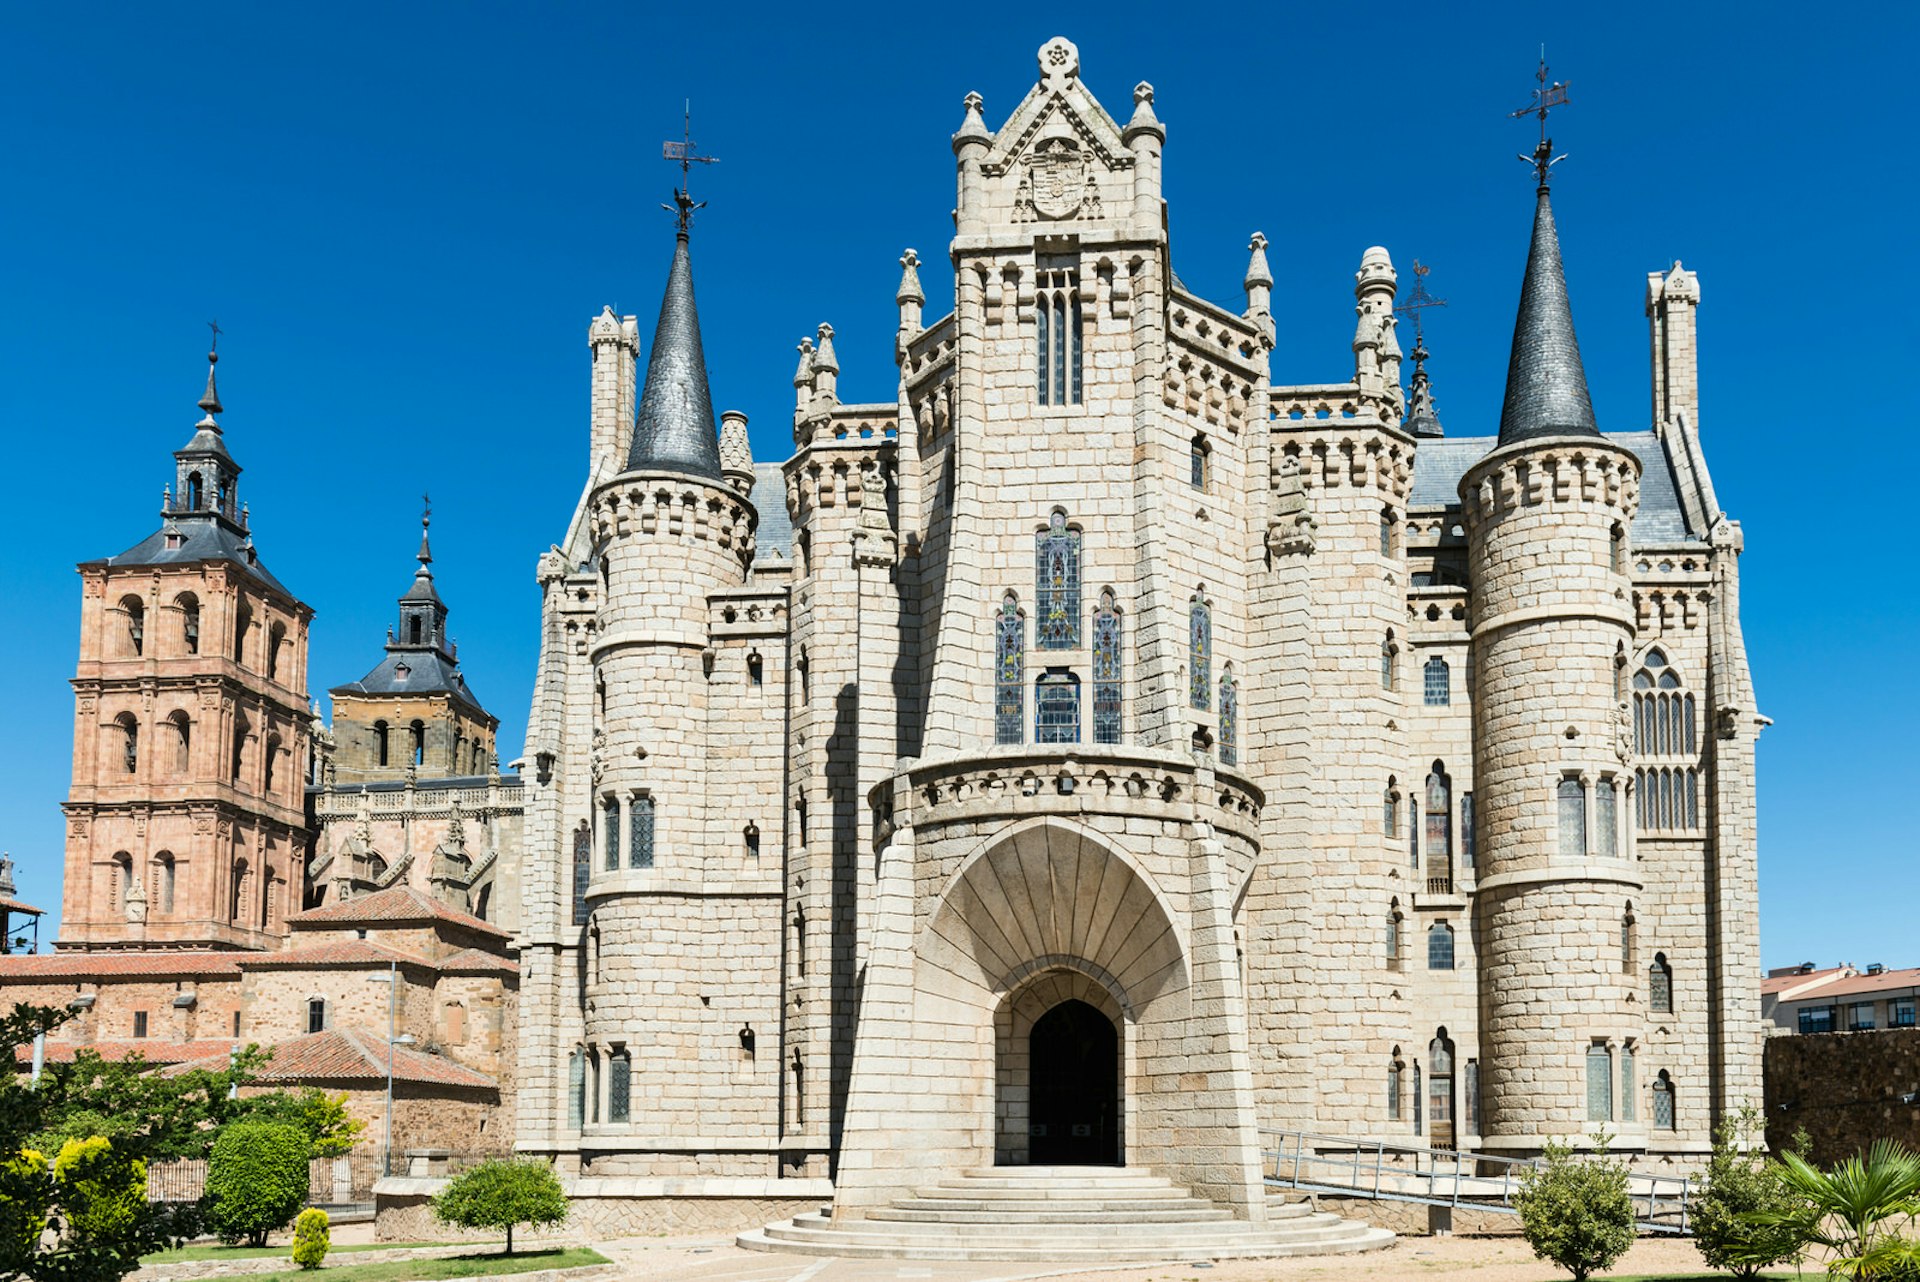 Gaudí’s masterpiece in Astorga, the Palacio Episcopal, with the cathedral behind it